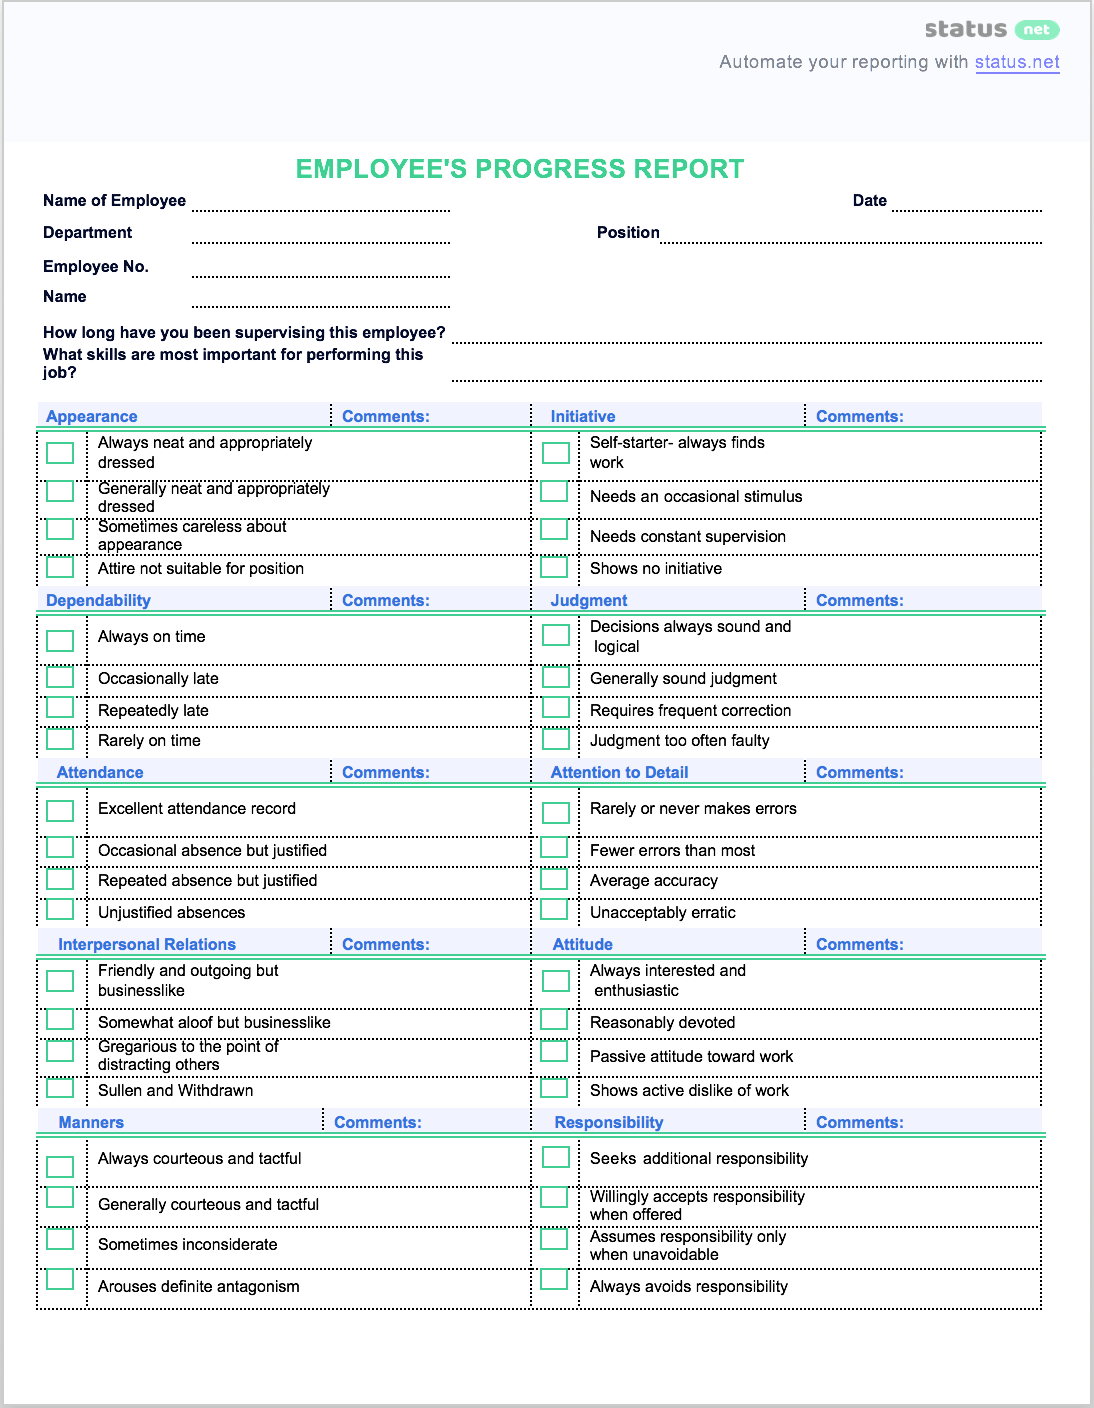 Best Progress Report: How To’s + Free Samples [The Complete List] For Staff Progress Report Template